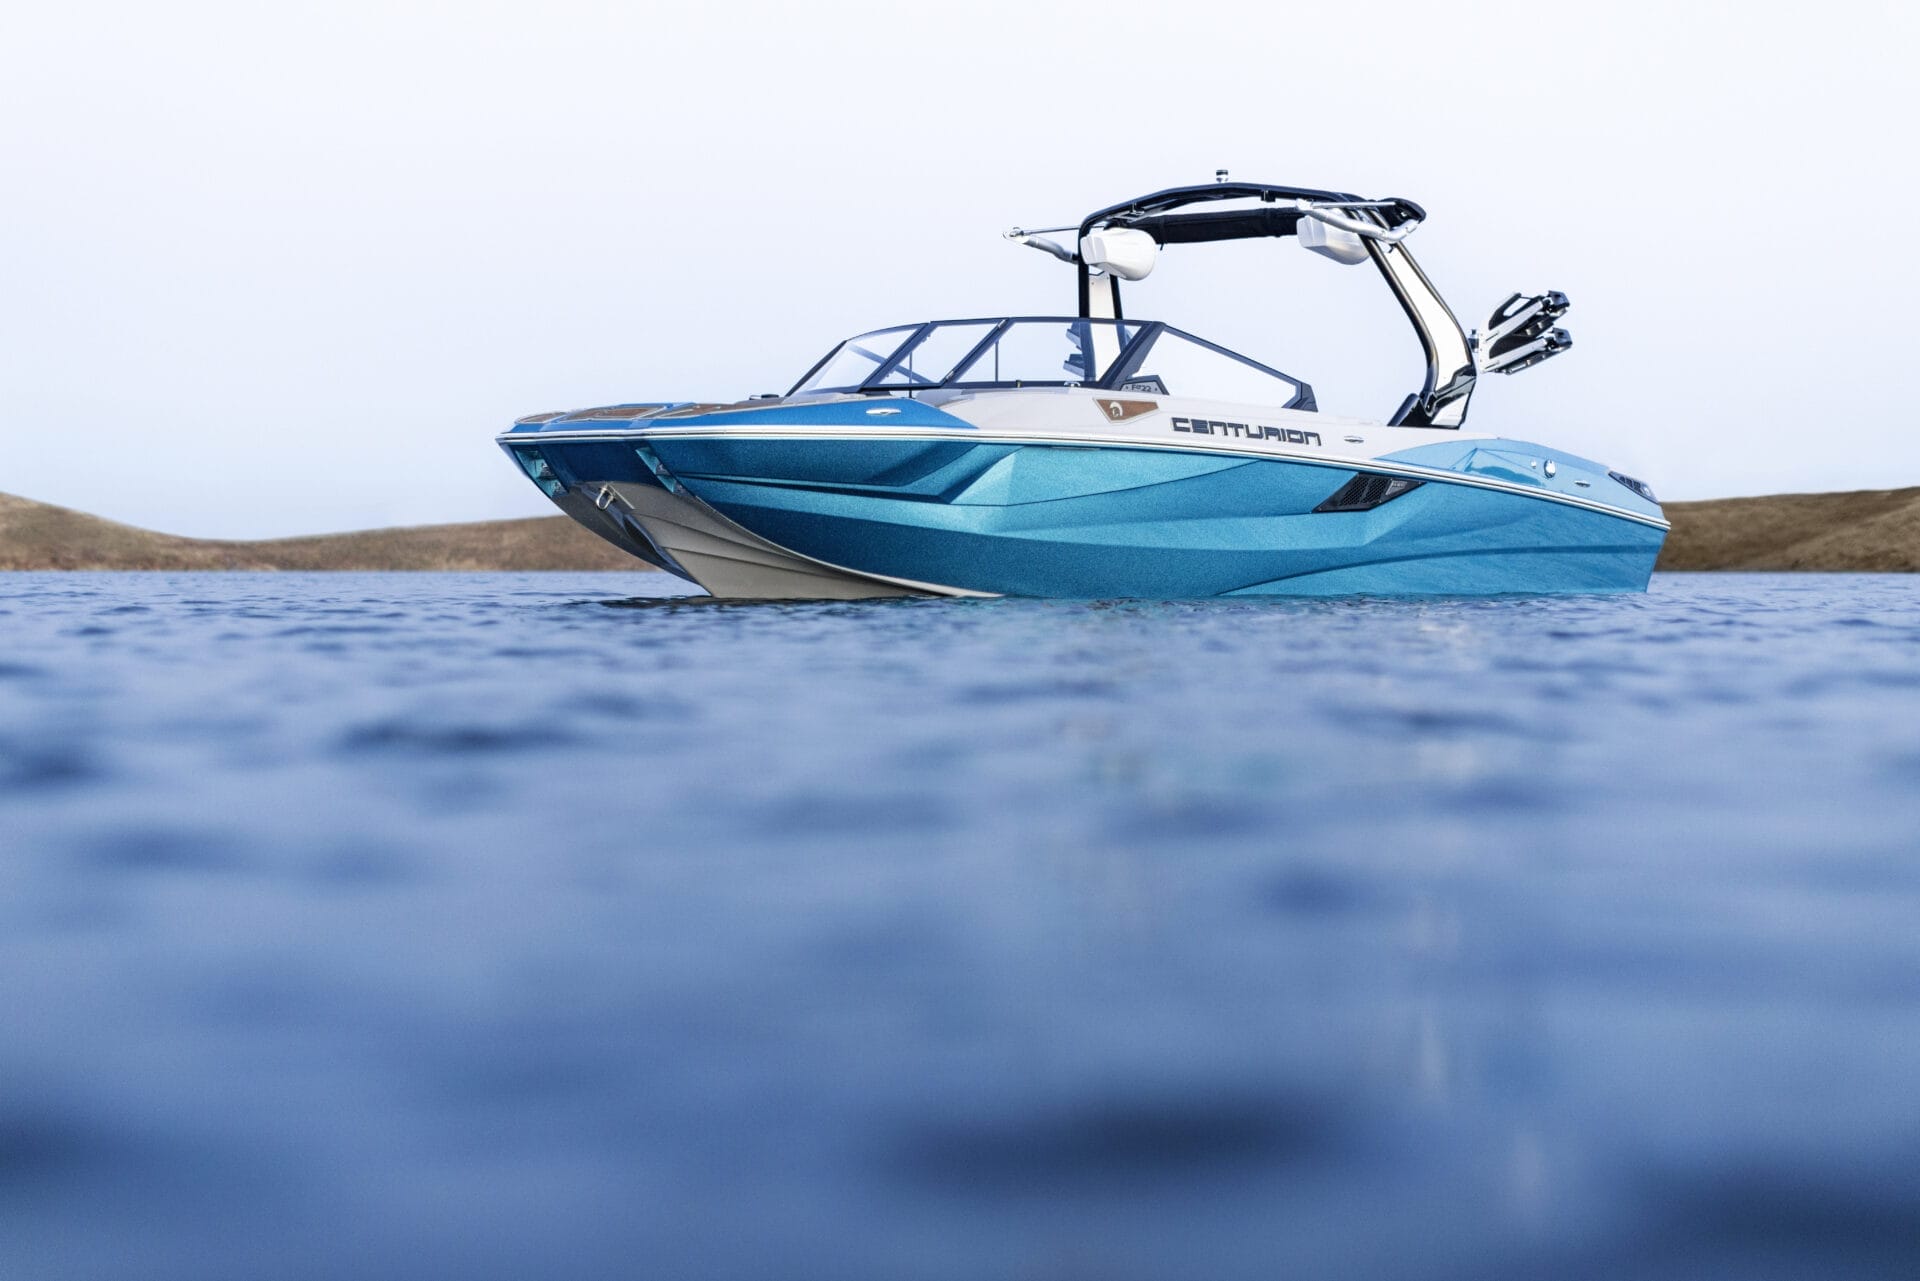 A blue and white Centurion speedboat is on the water, photographed from a low angle with distant land visible in the background.